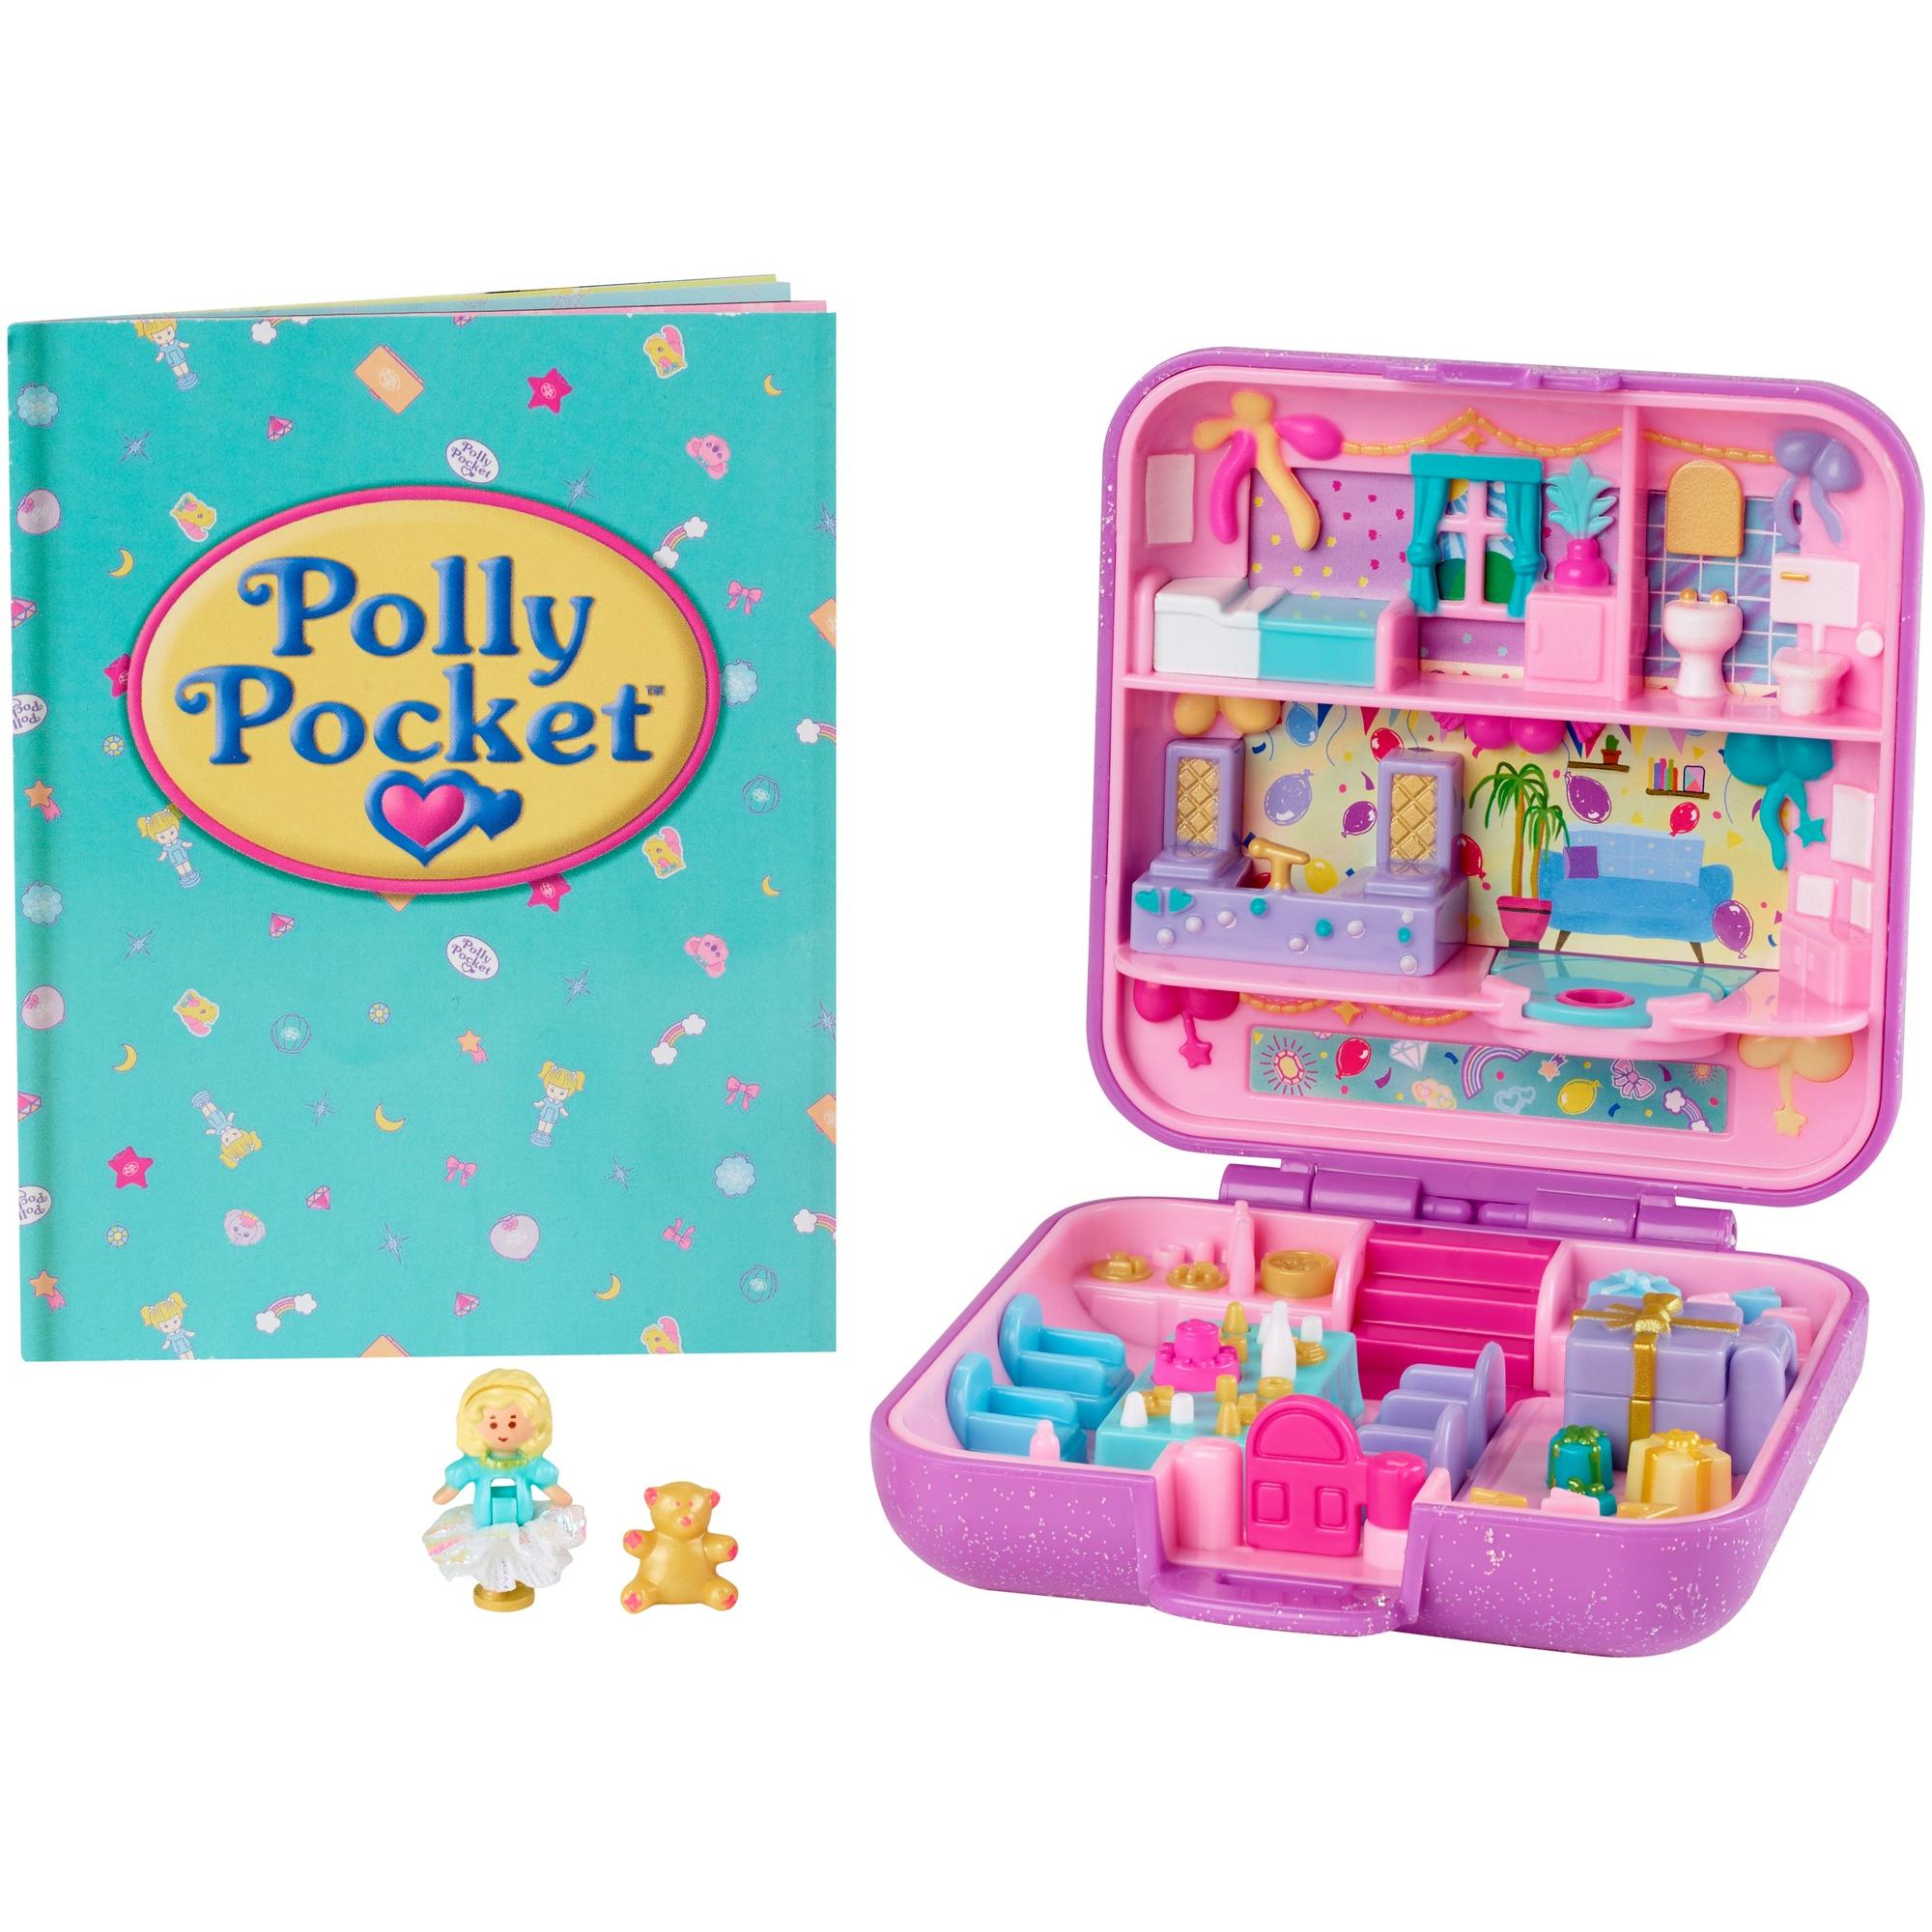 Polly Pocket Partytime Surprise Keepsake 30th Anniversary Compact - image 1 of 6